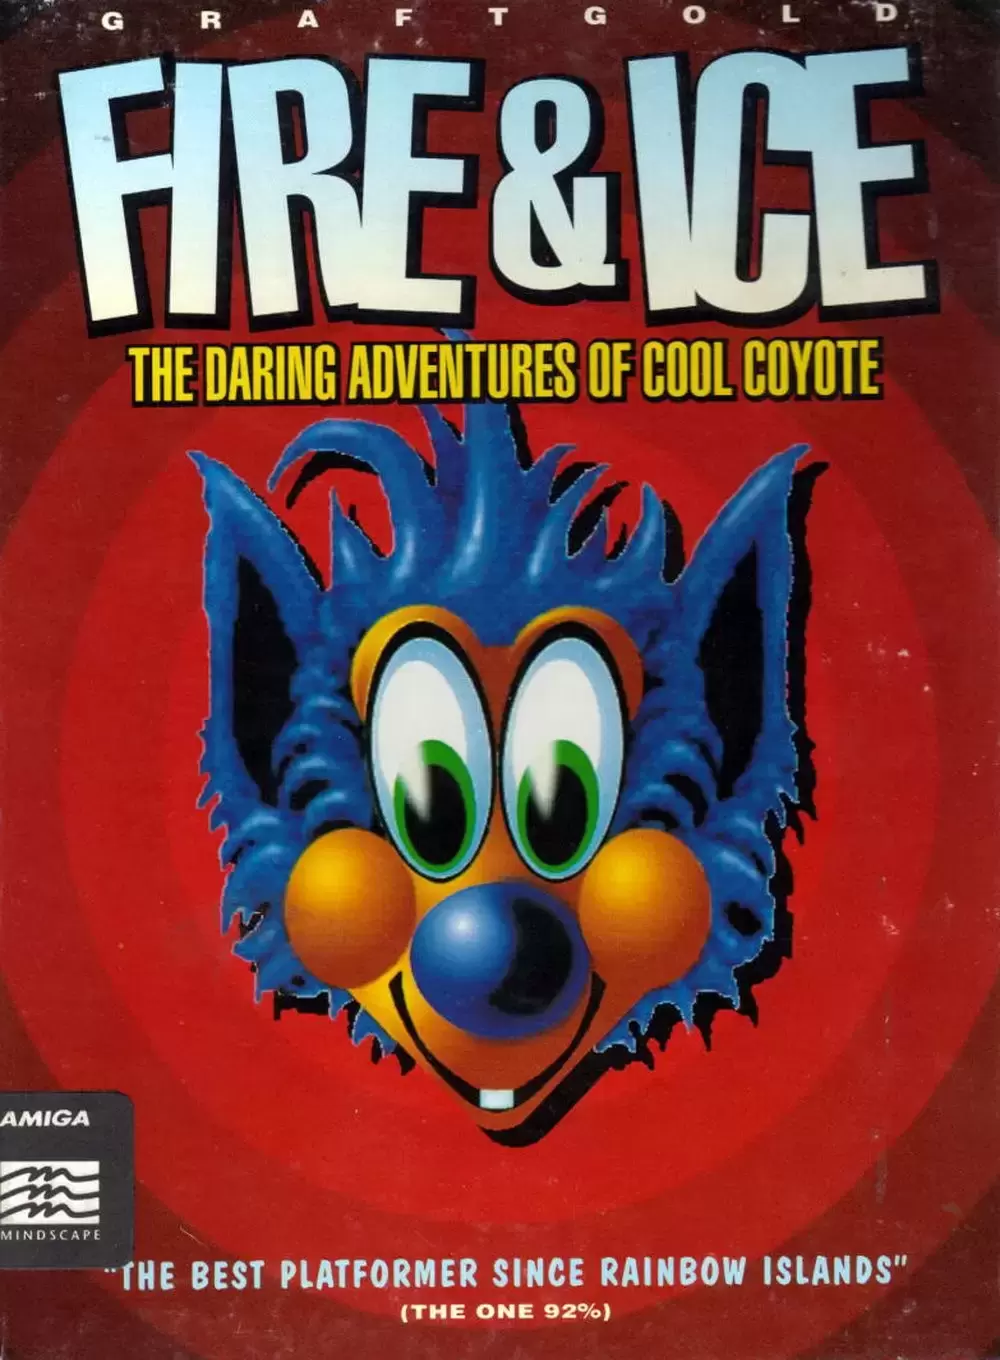 Amiga - Fire and Ice: The Daring Adventures of Cool Coyote